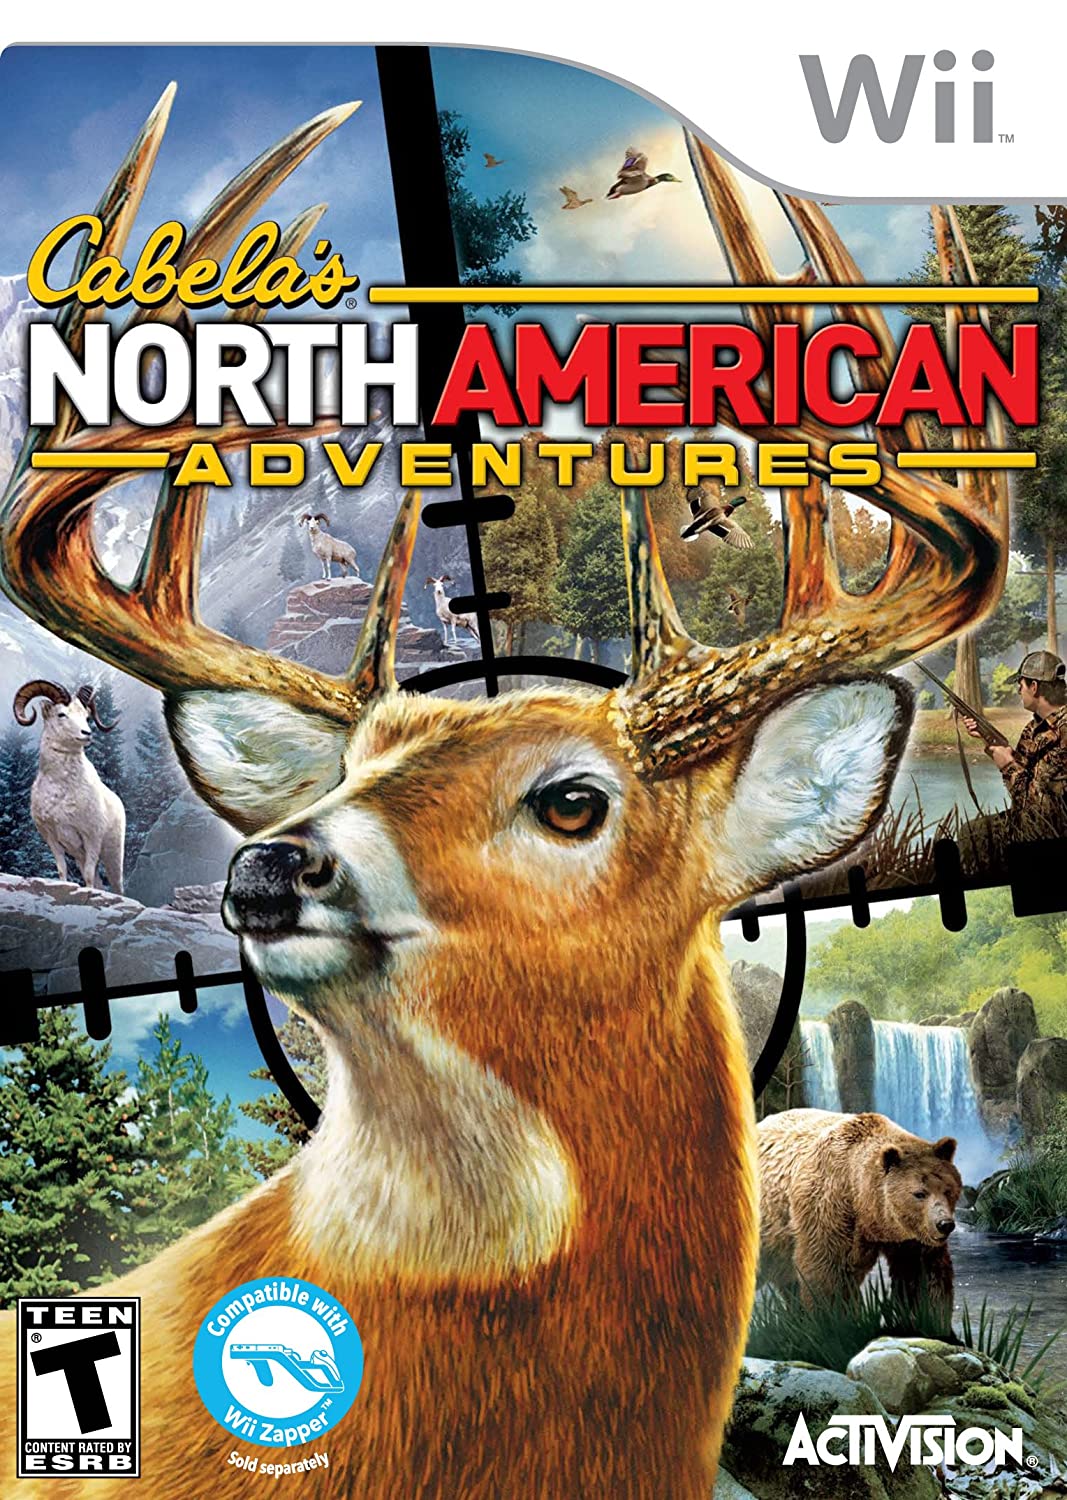 Cabela’s North American Adventures player count stats